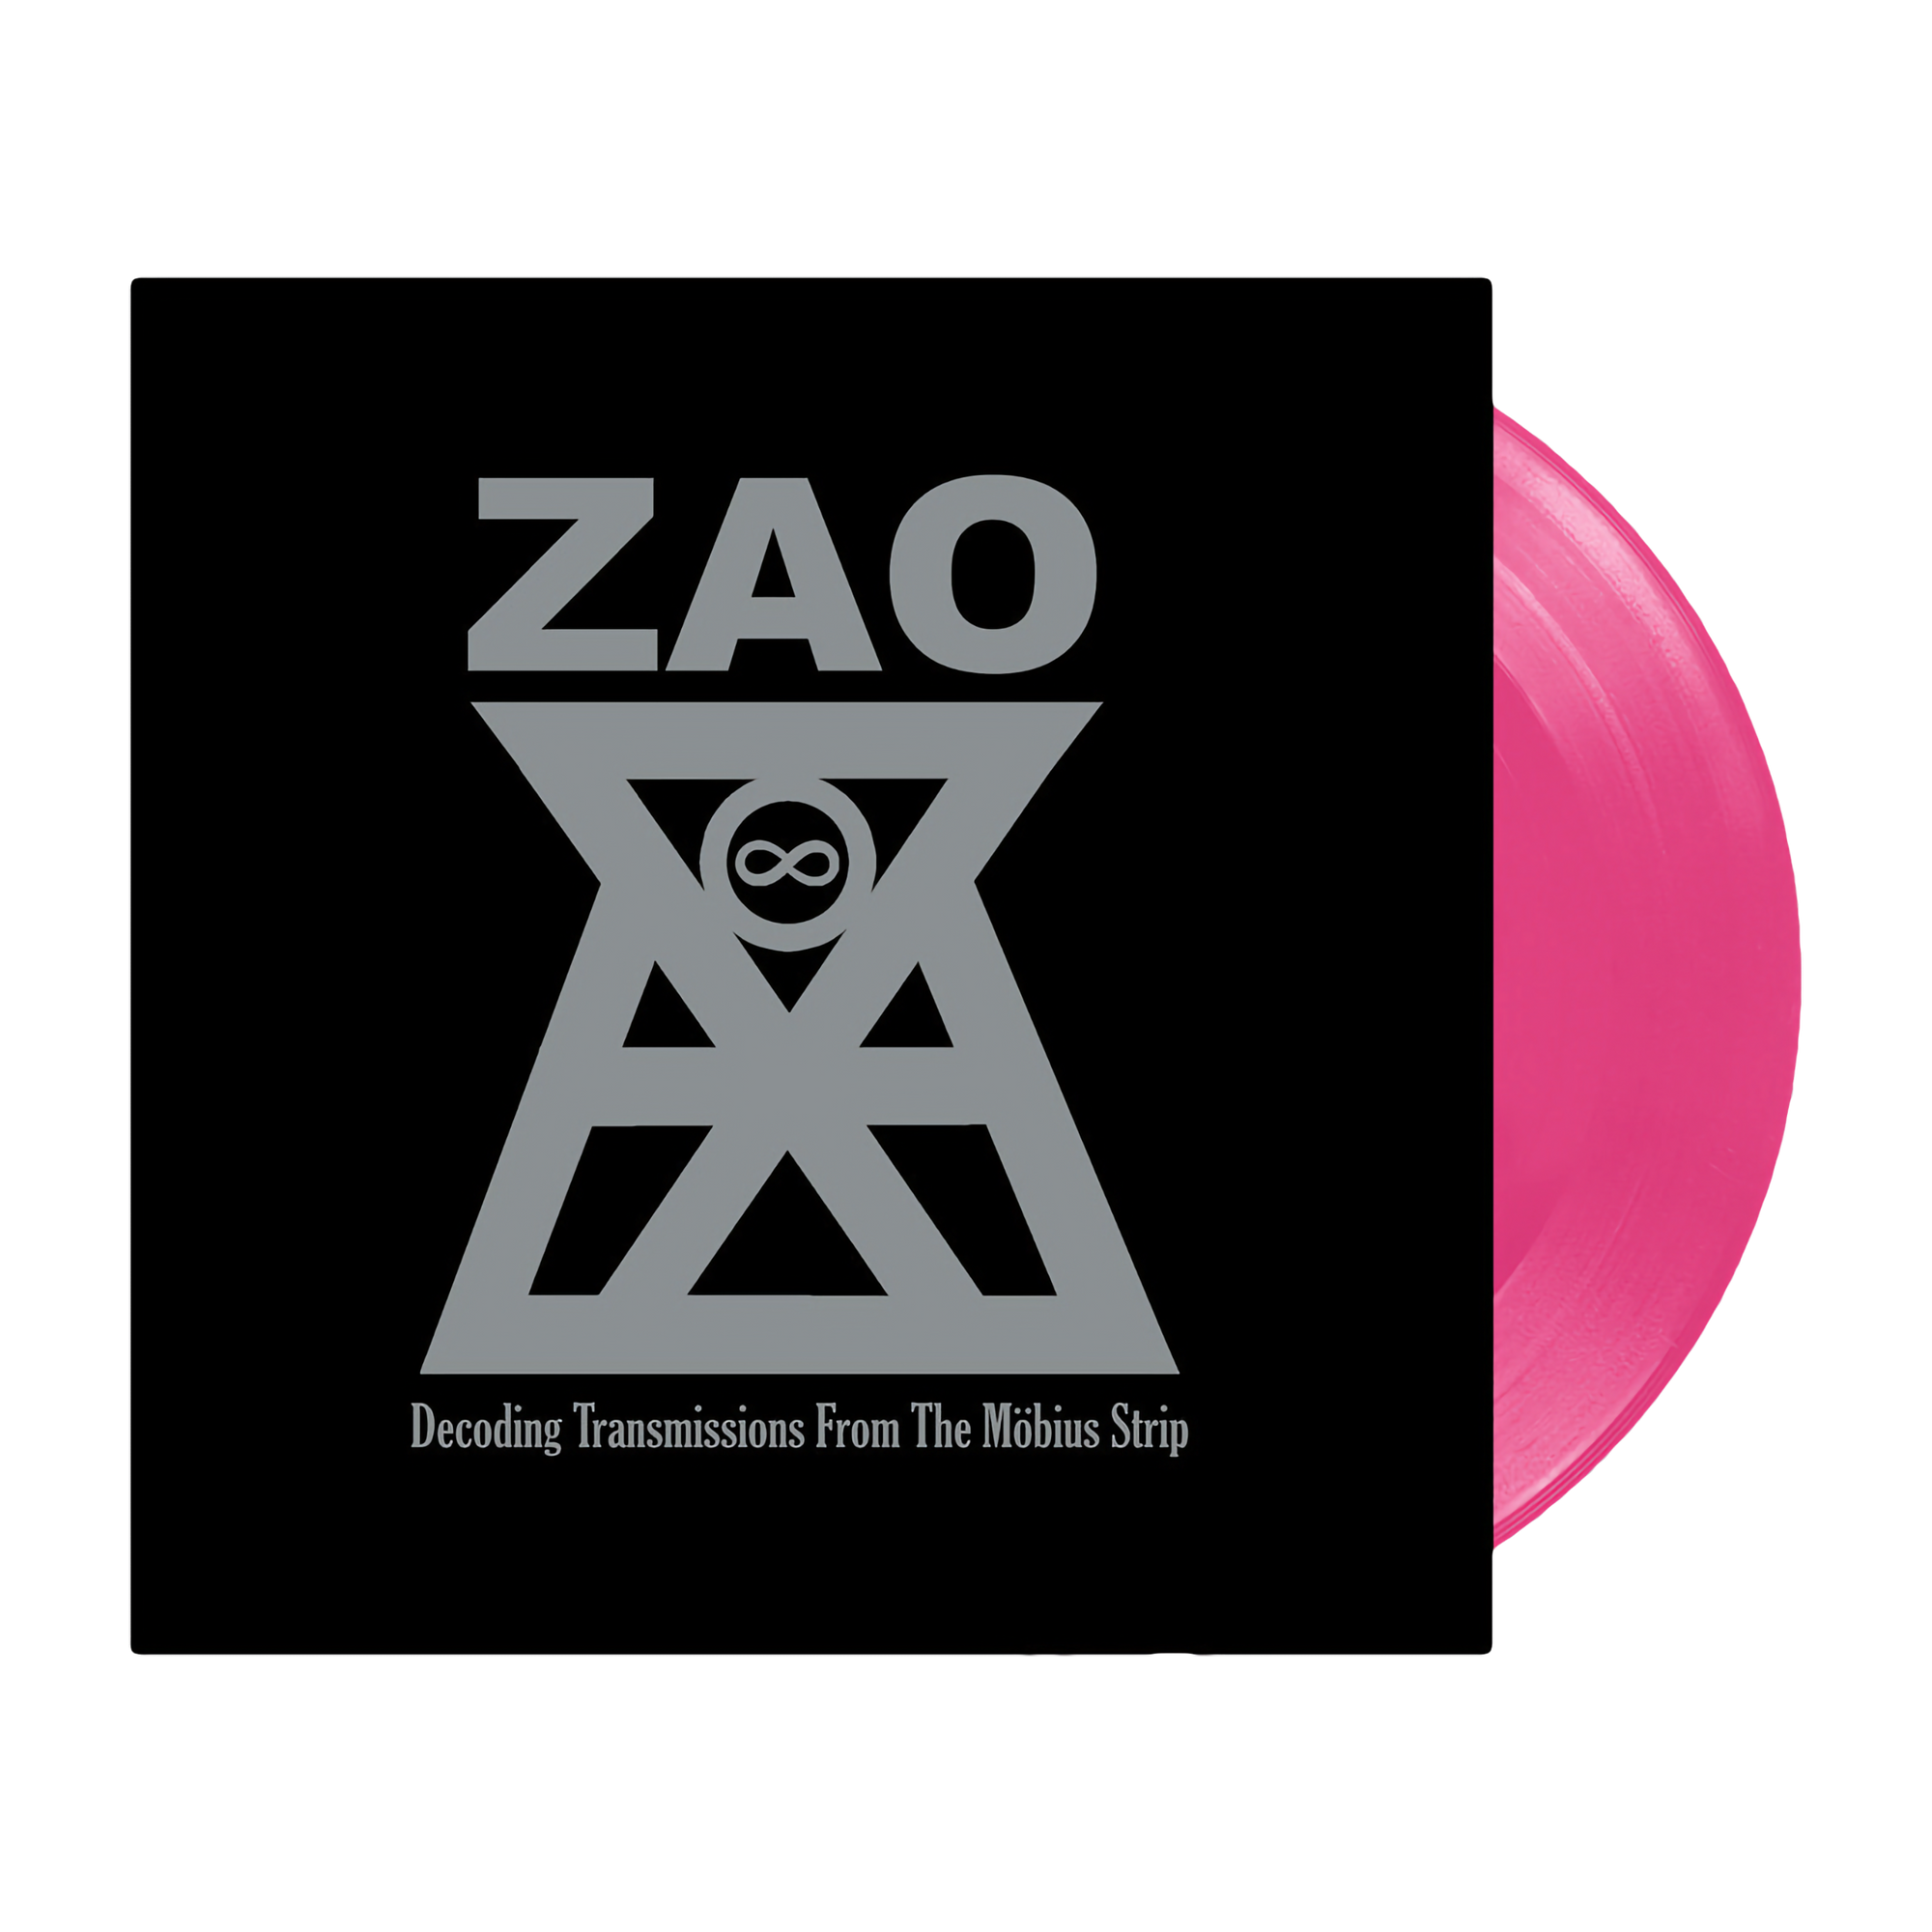 ZAO "Decoding Transmissions From The Möbius Strip"